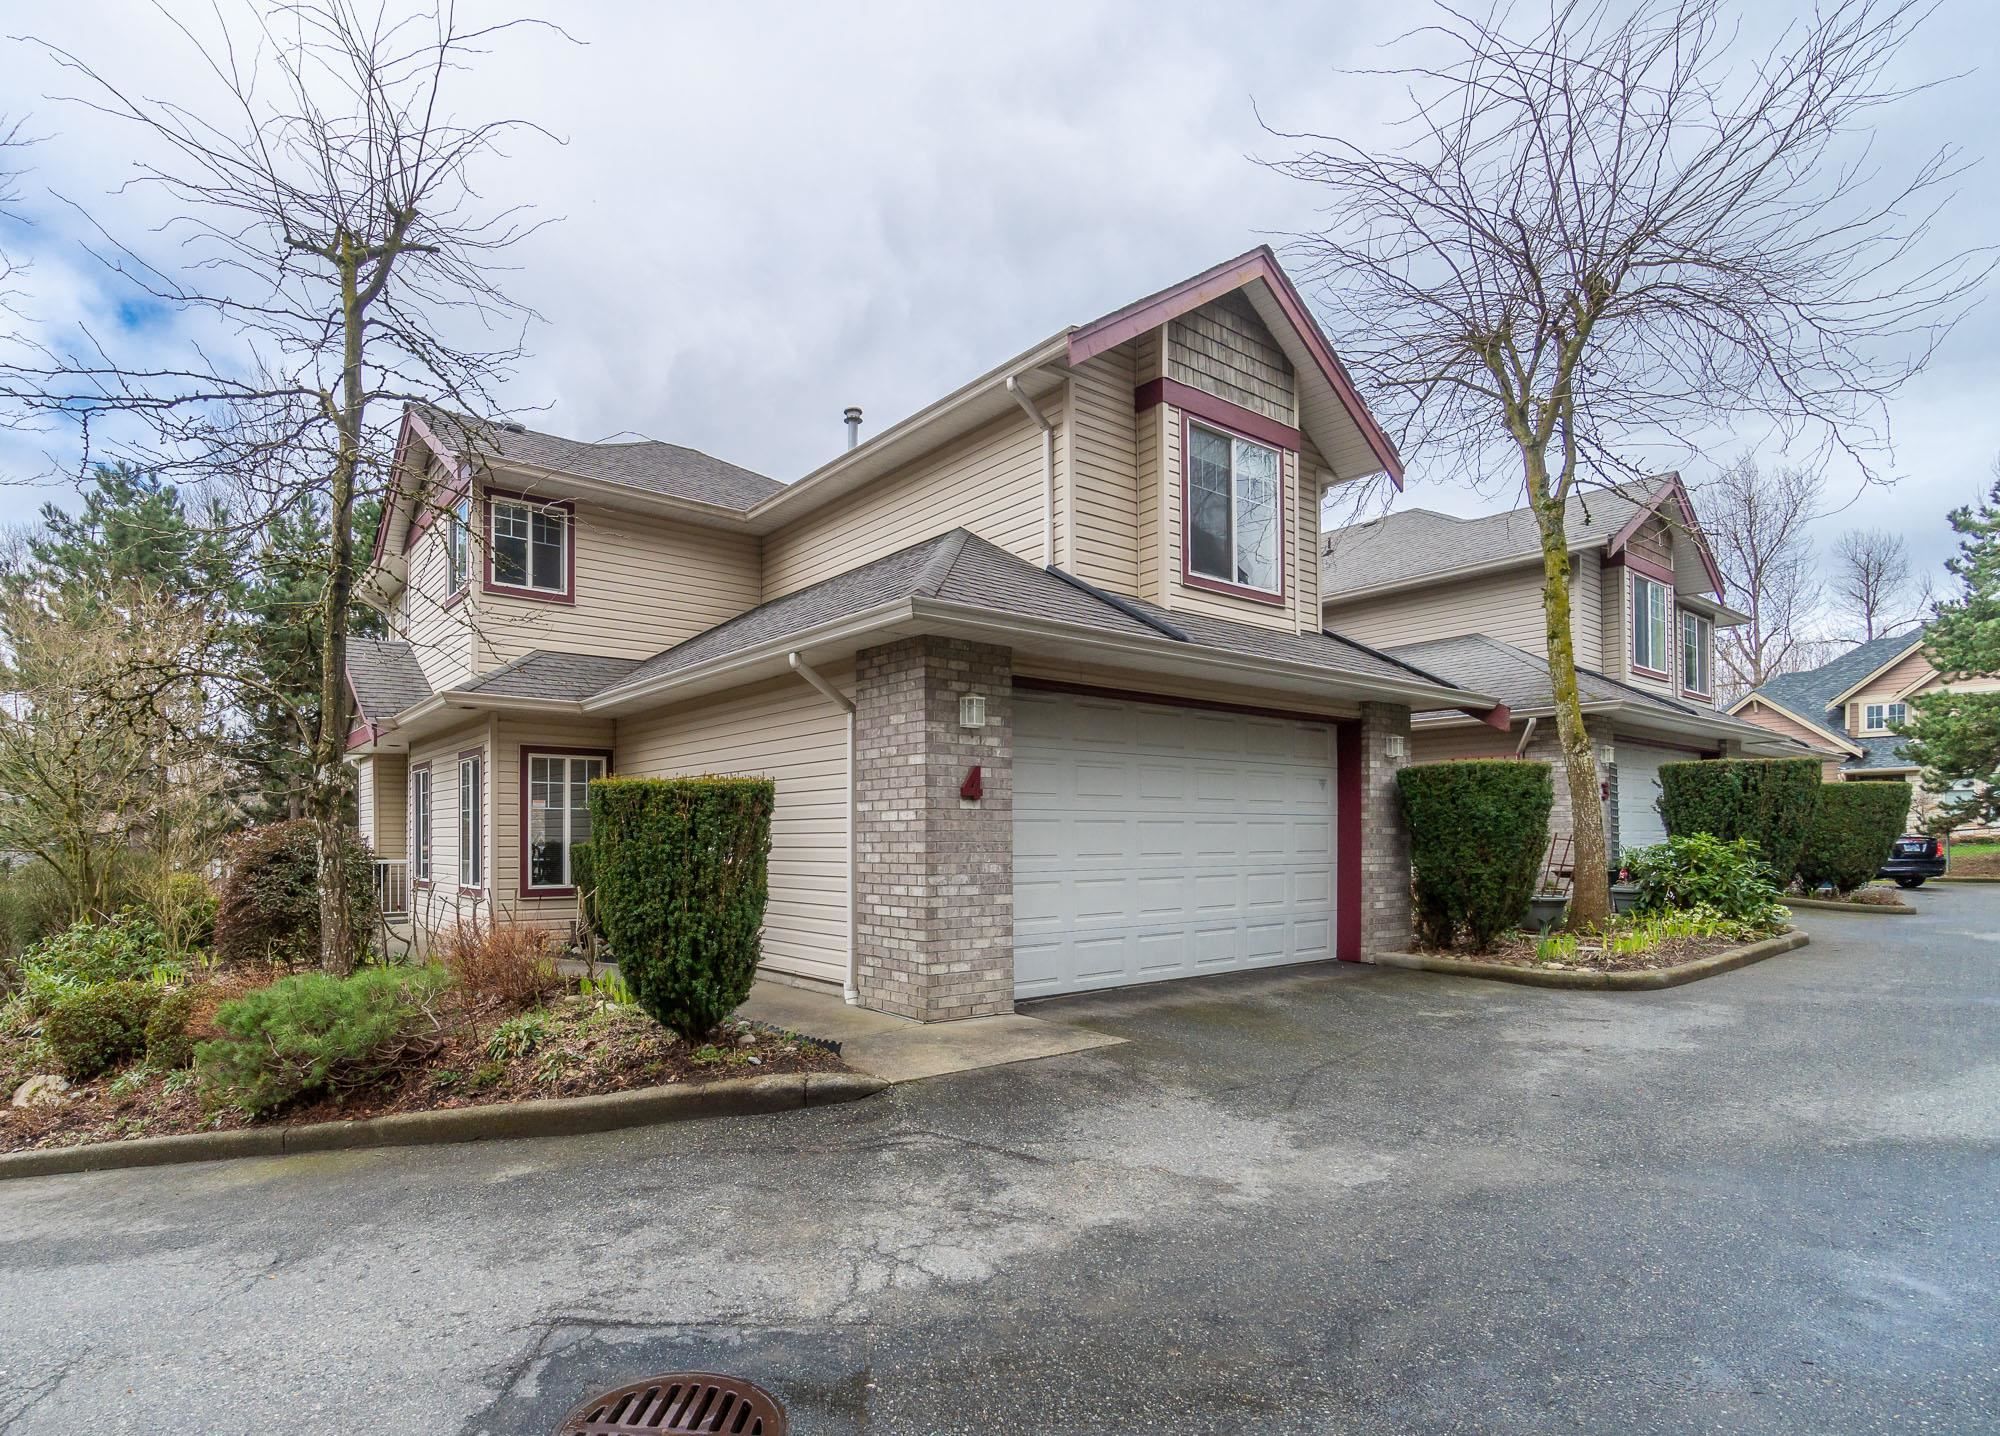 New property listed in Abbotsford West, Abbotsford